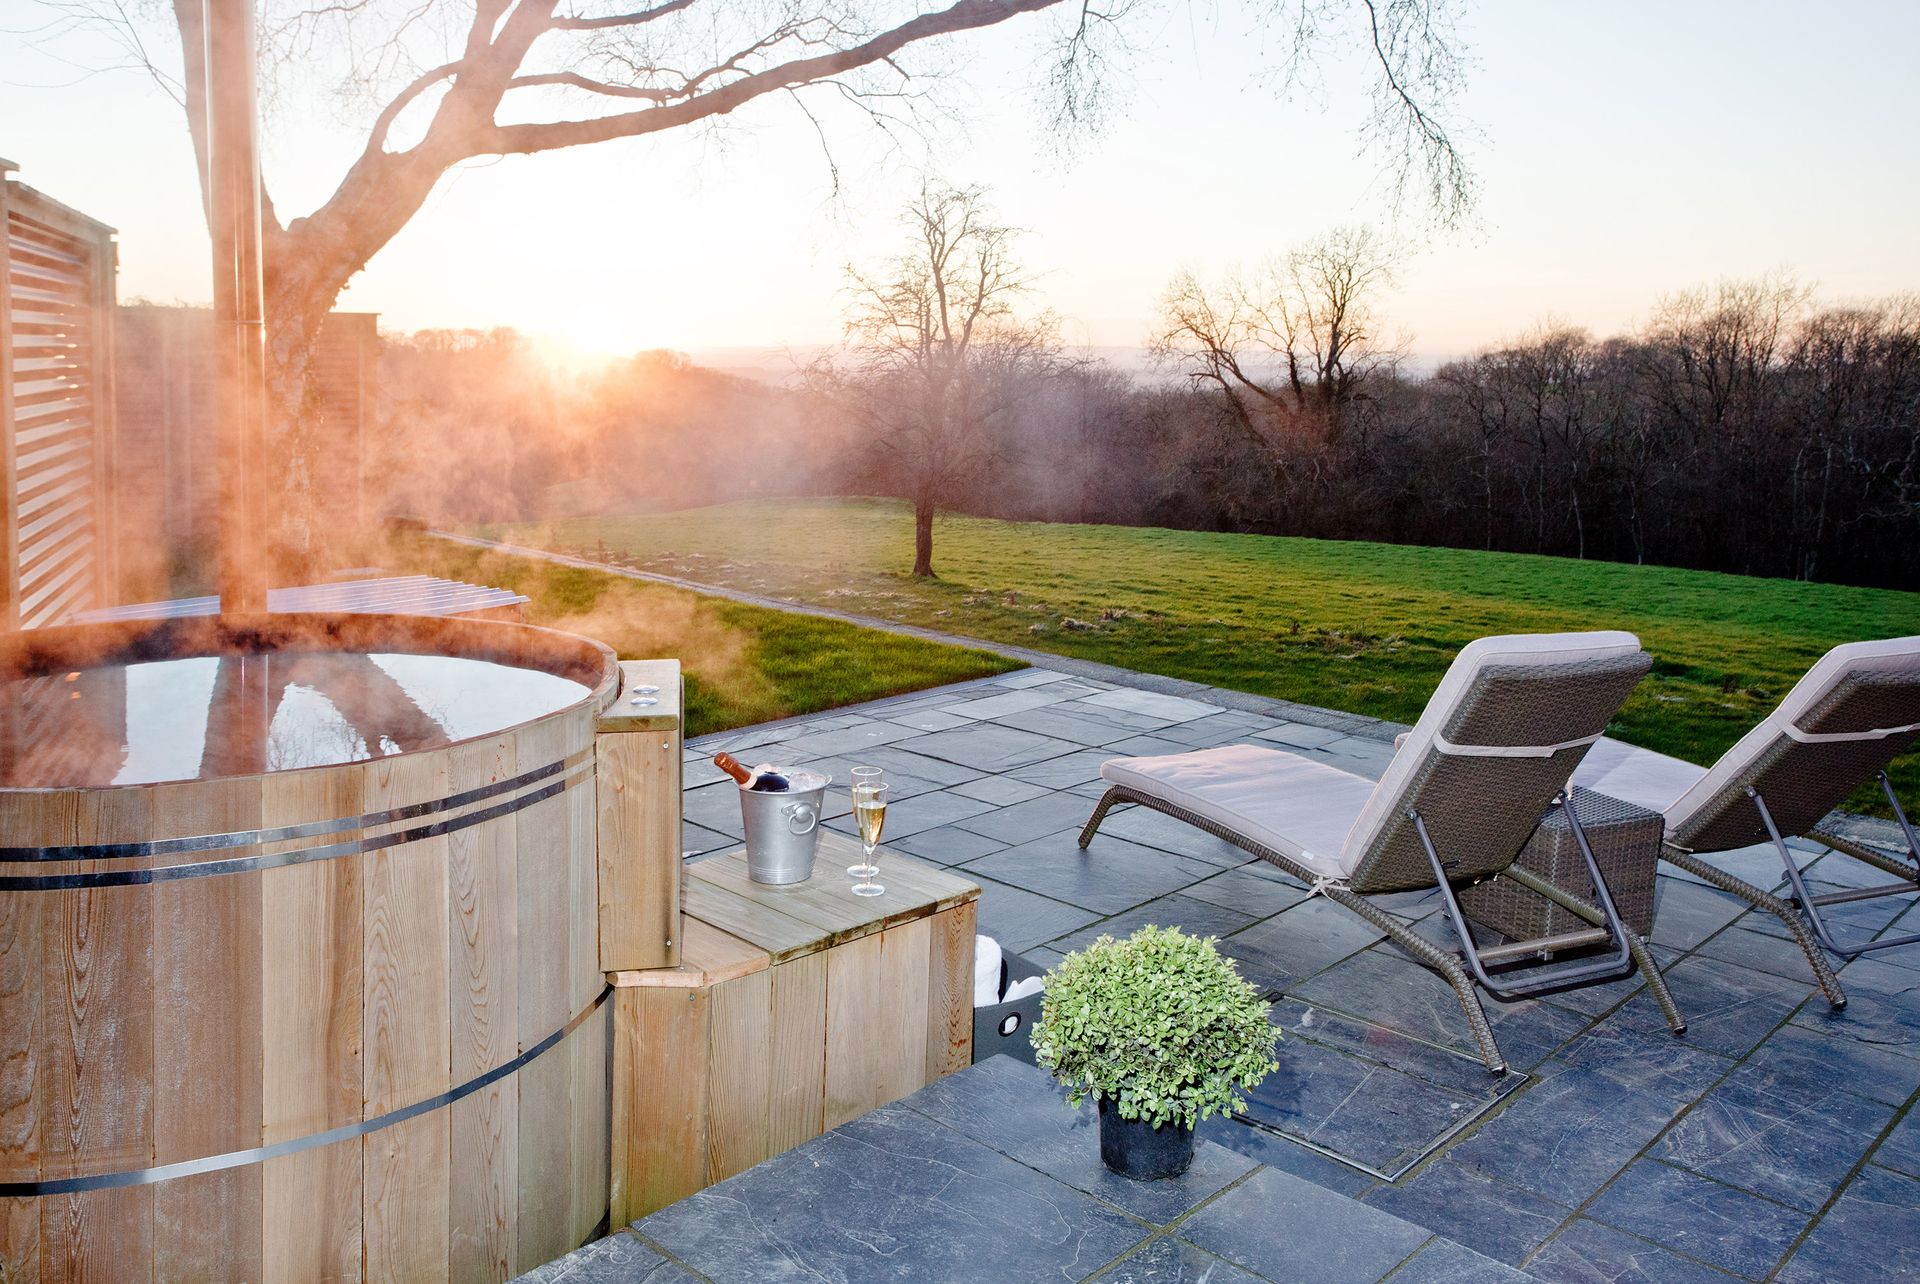 <p>                     This paved space has everything needed for a pared-back chill-out zone. Views of the lawn can be enjoyed from the traditional tub, while sun loungers nearby are handy for when you need to take a break from the bubbles – just throw on a white robe and some sliders and chill.                   </p>                                      <p>                     For the winter months, why not add patio heaters? That way, your outdoor area will be transformed into a welcoming spa all year-round.                   </p>